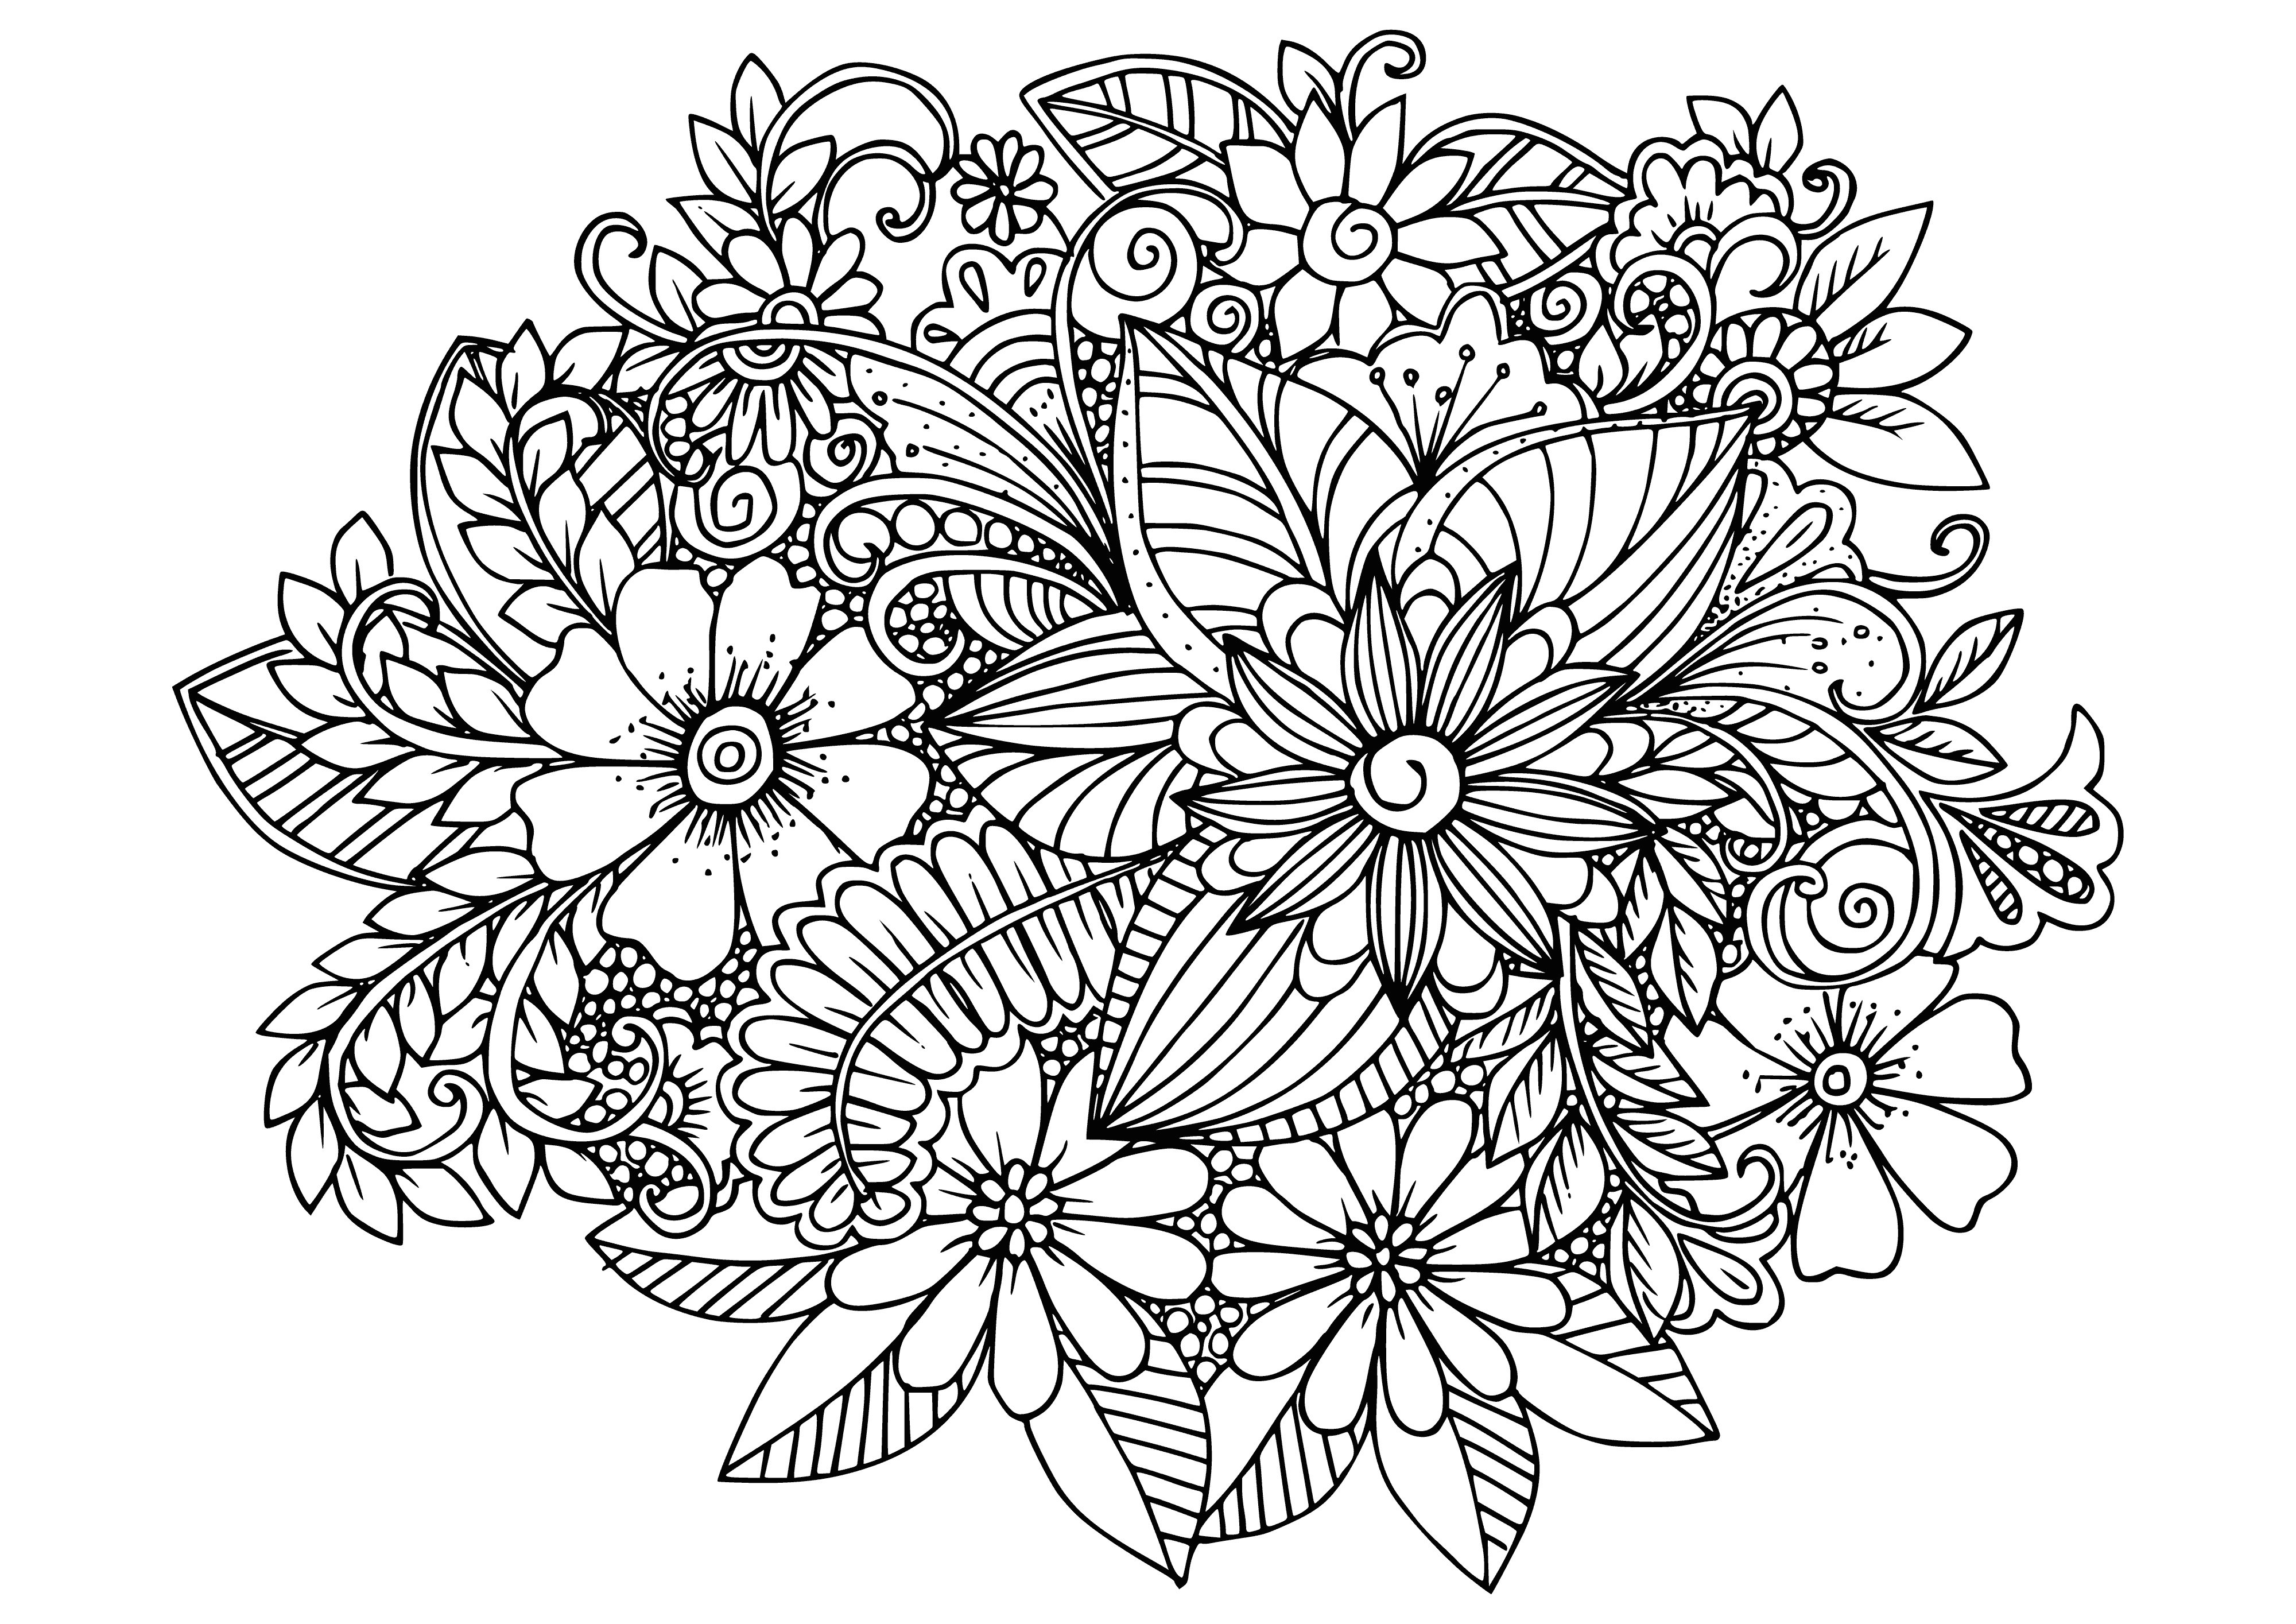 coloring page: 140 ch: Coloring page w/ many different flowers, leaves, vines of varying colors & sizes.